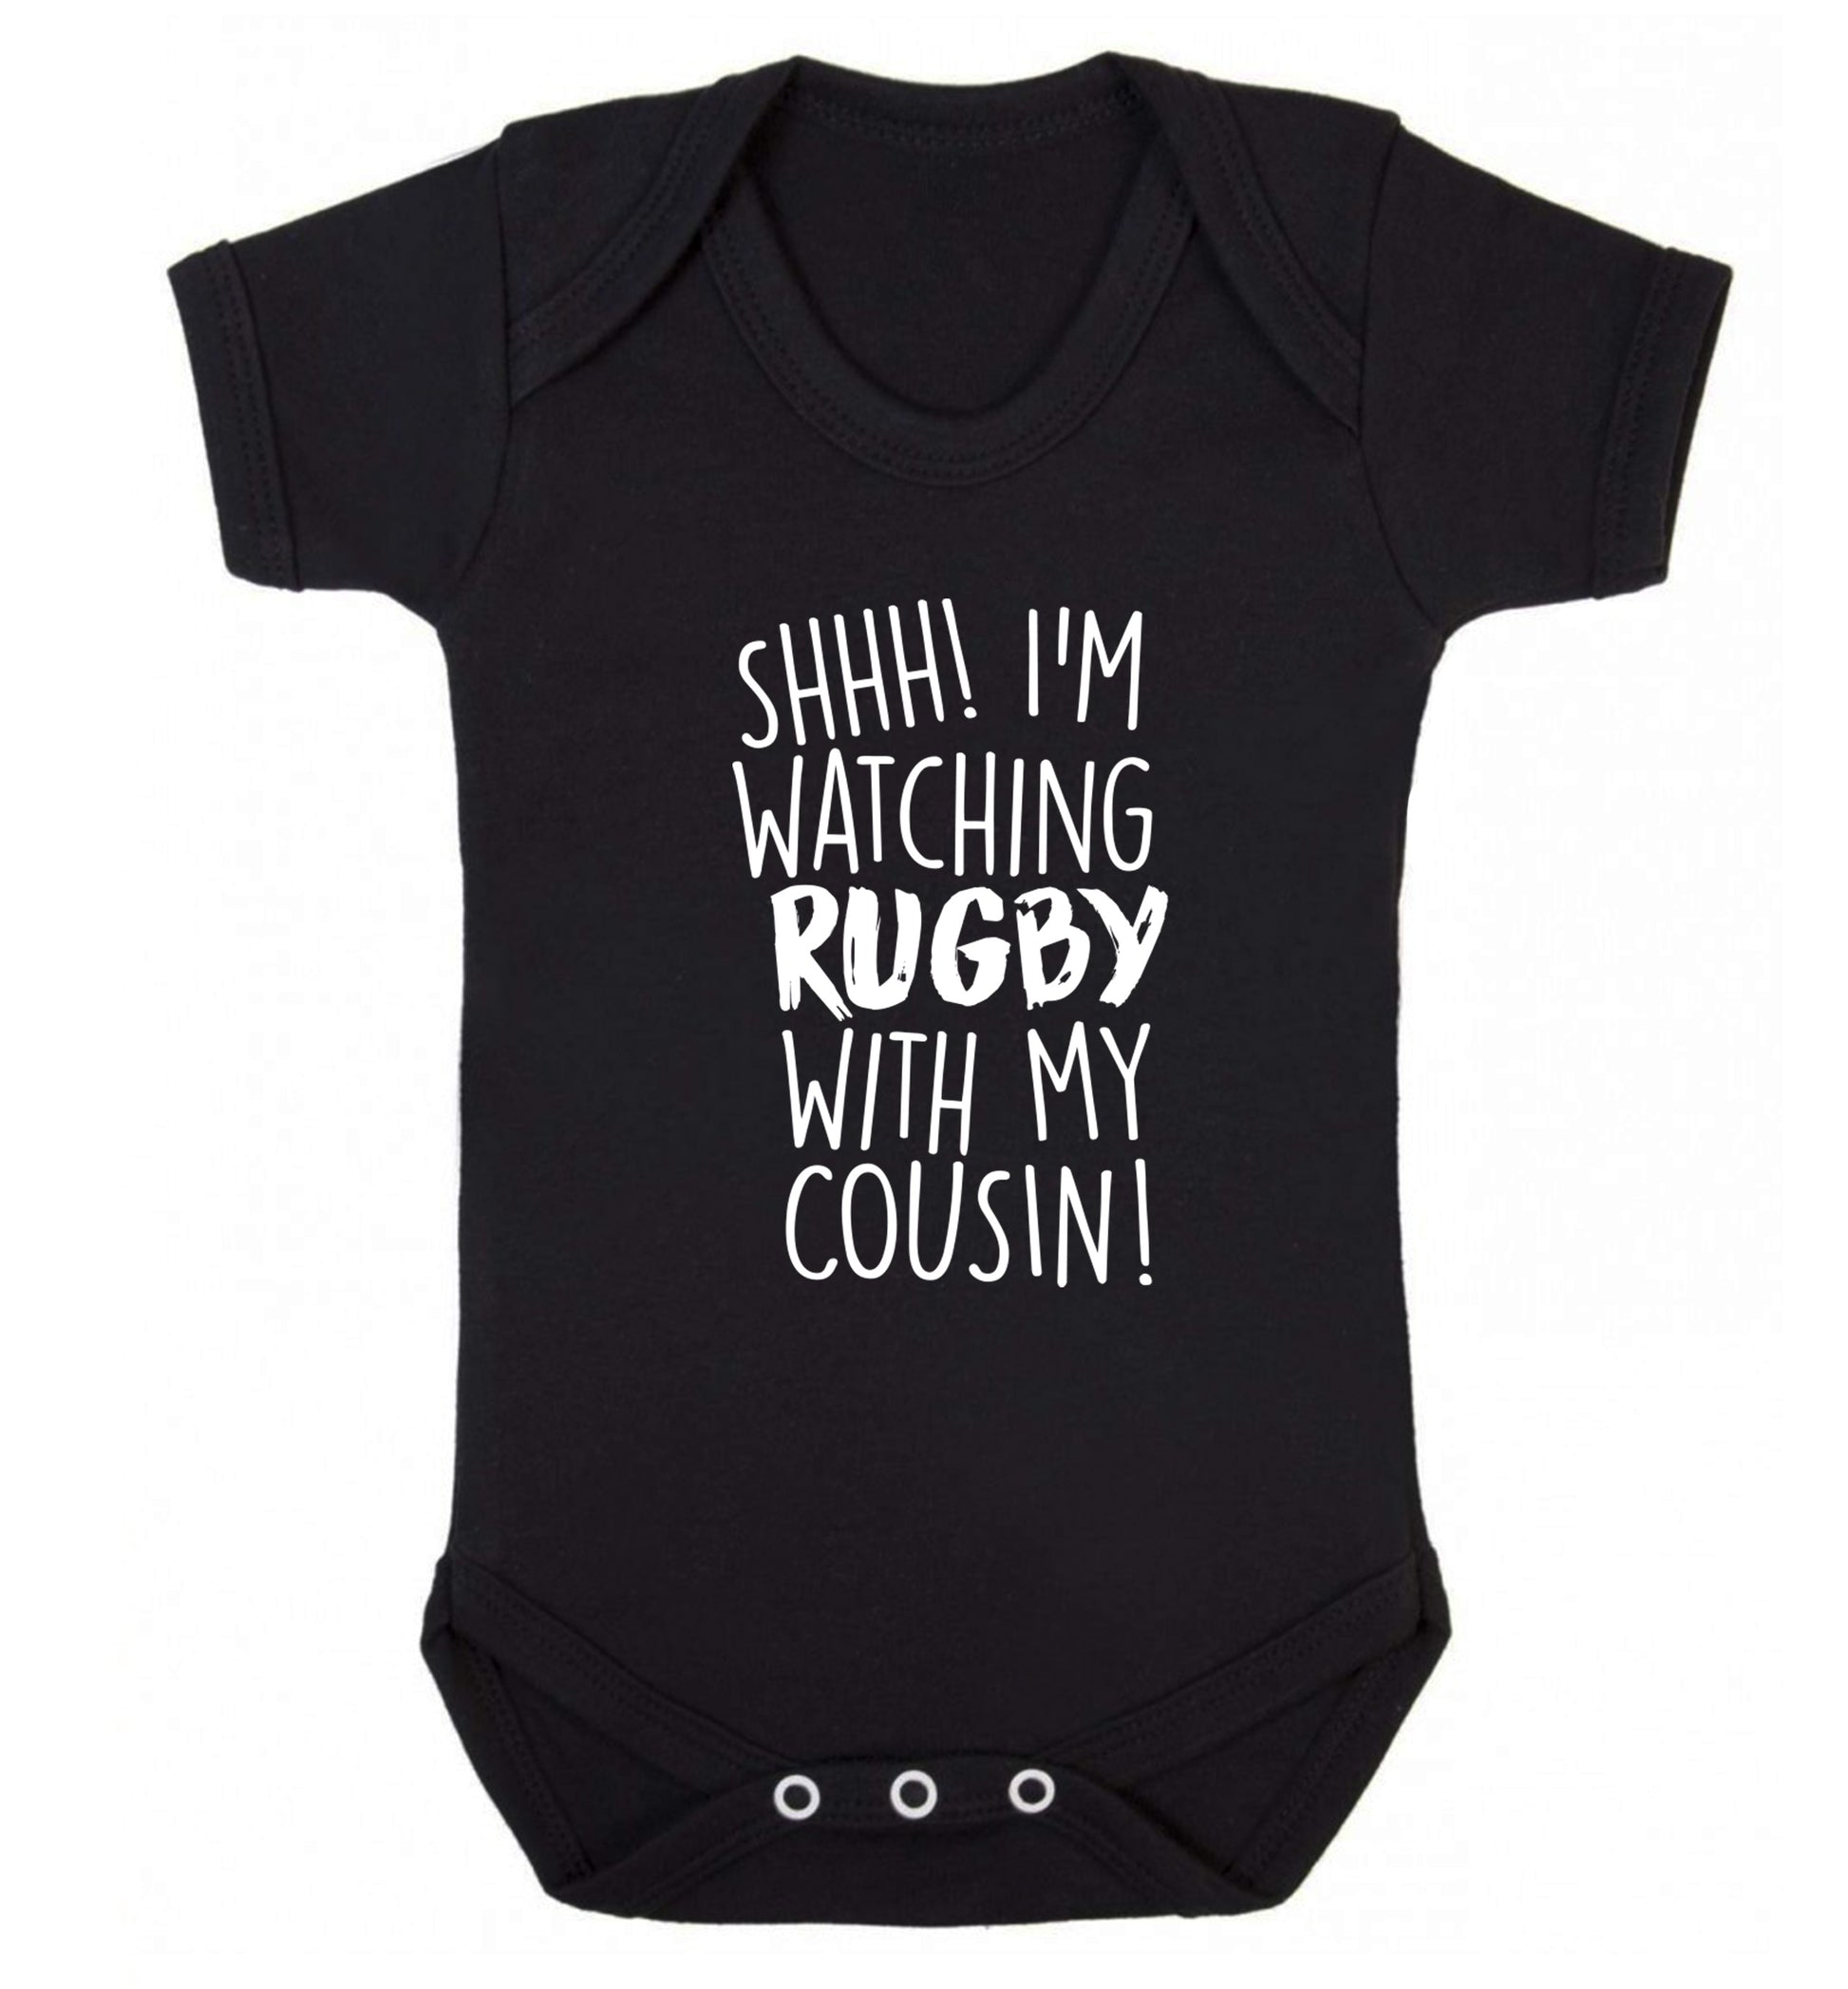 Shhh I'm watching rugby with my cousin Baby Vest black 18-24 months